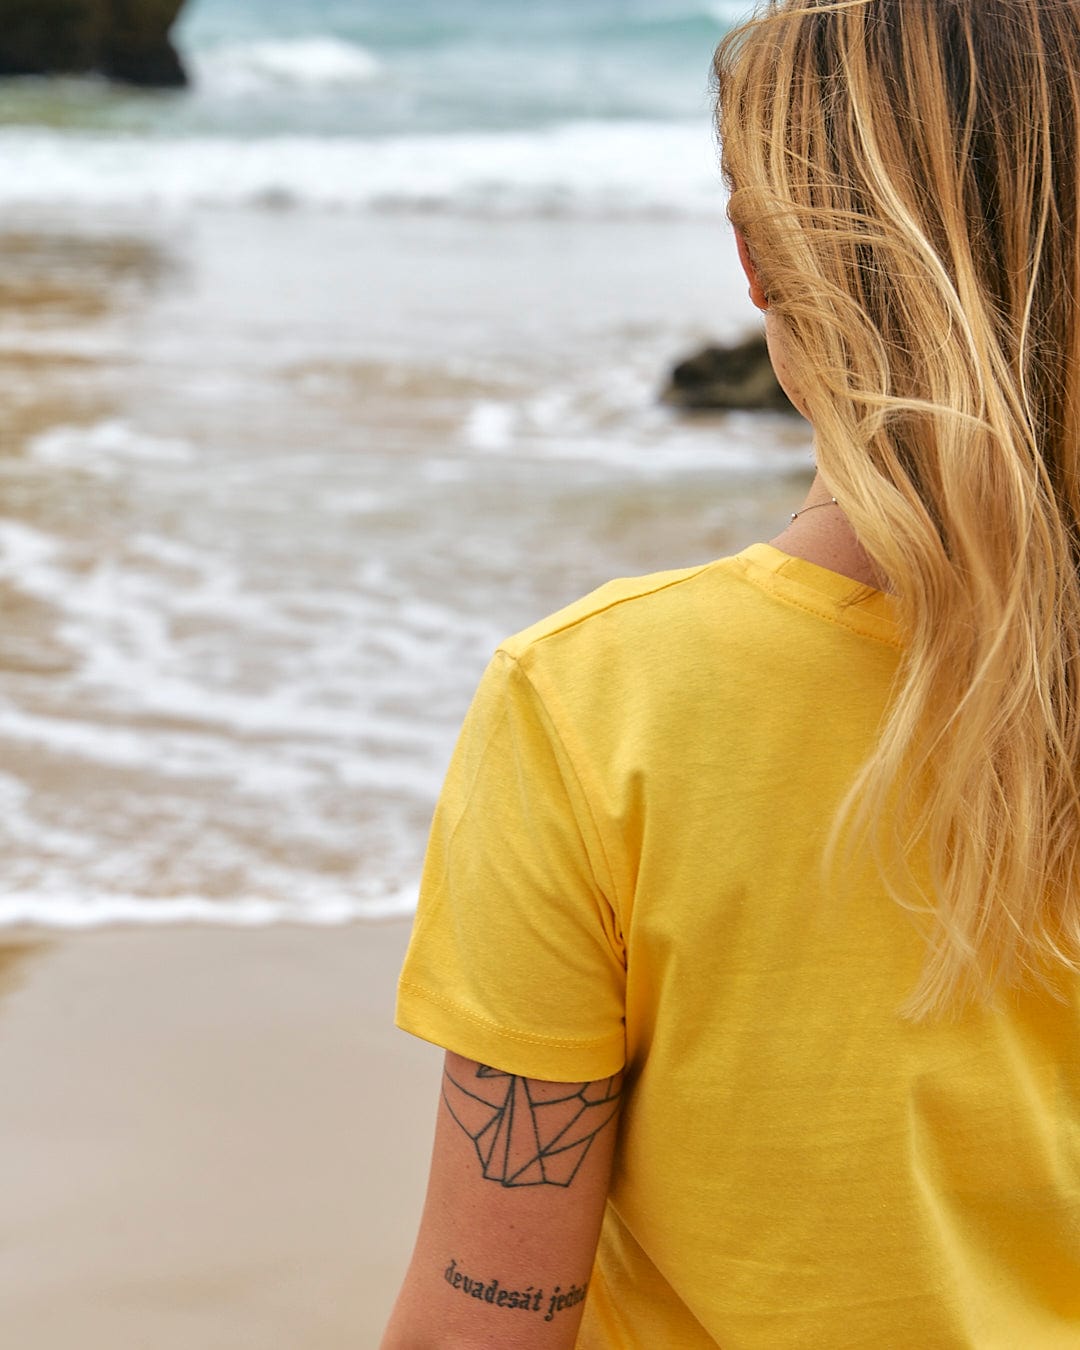 A woman wearing a Saltrock On The Road - Womens Short Sleeve T-Shirt - Yellow looking at the ocean.